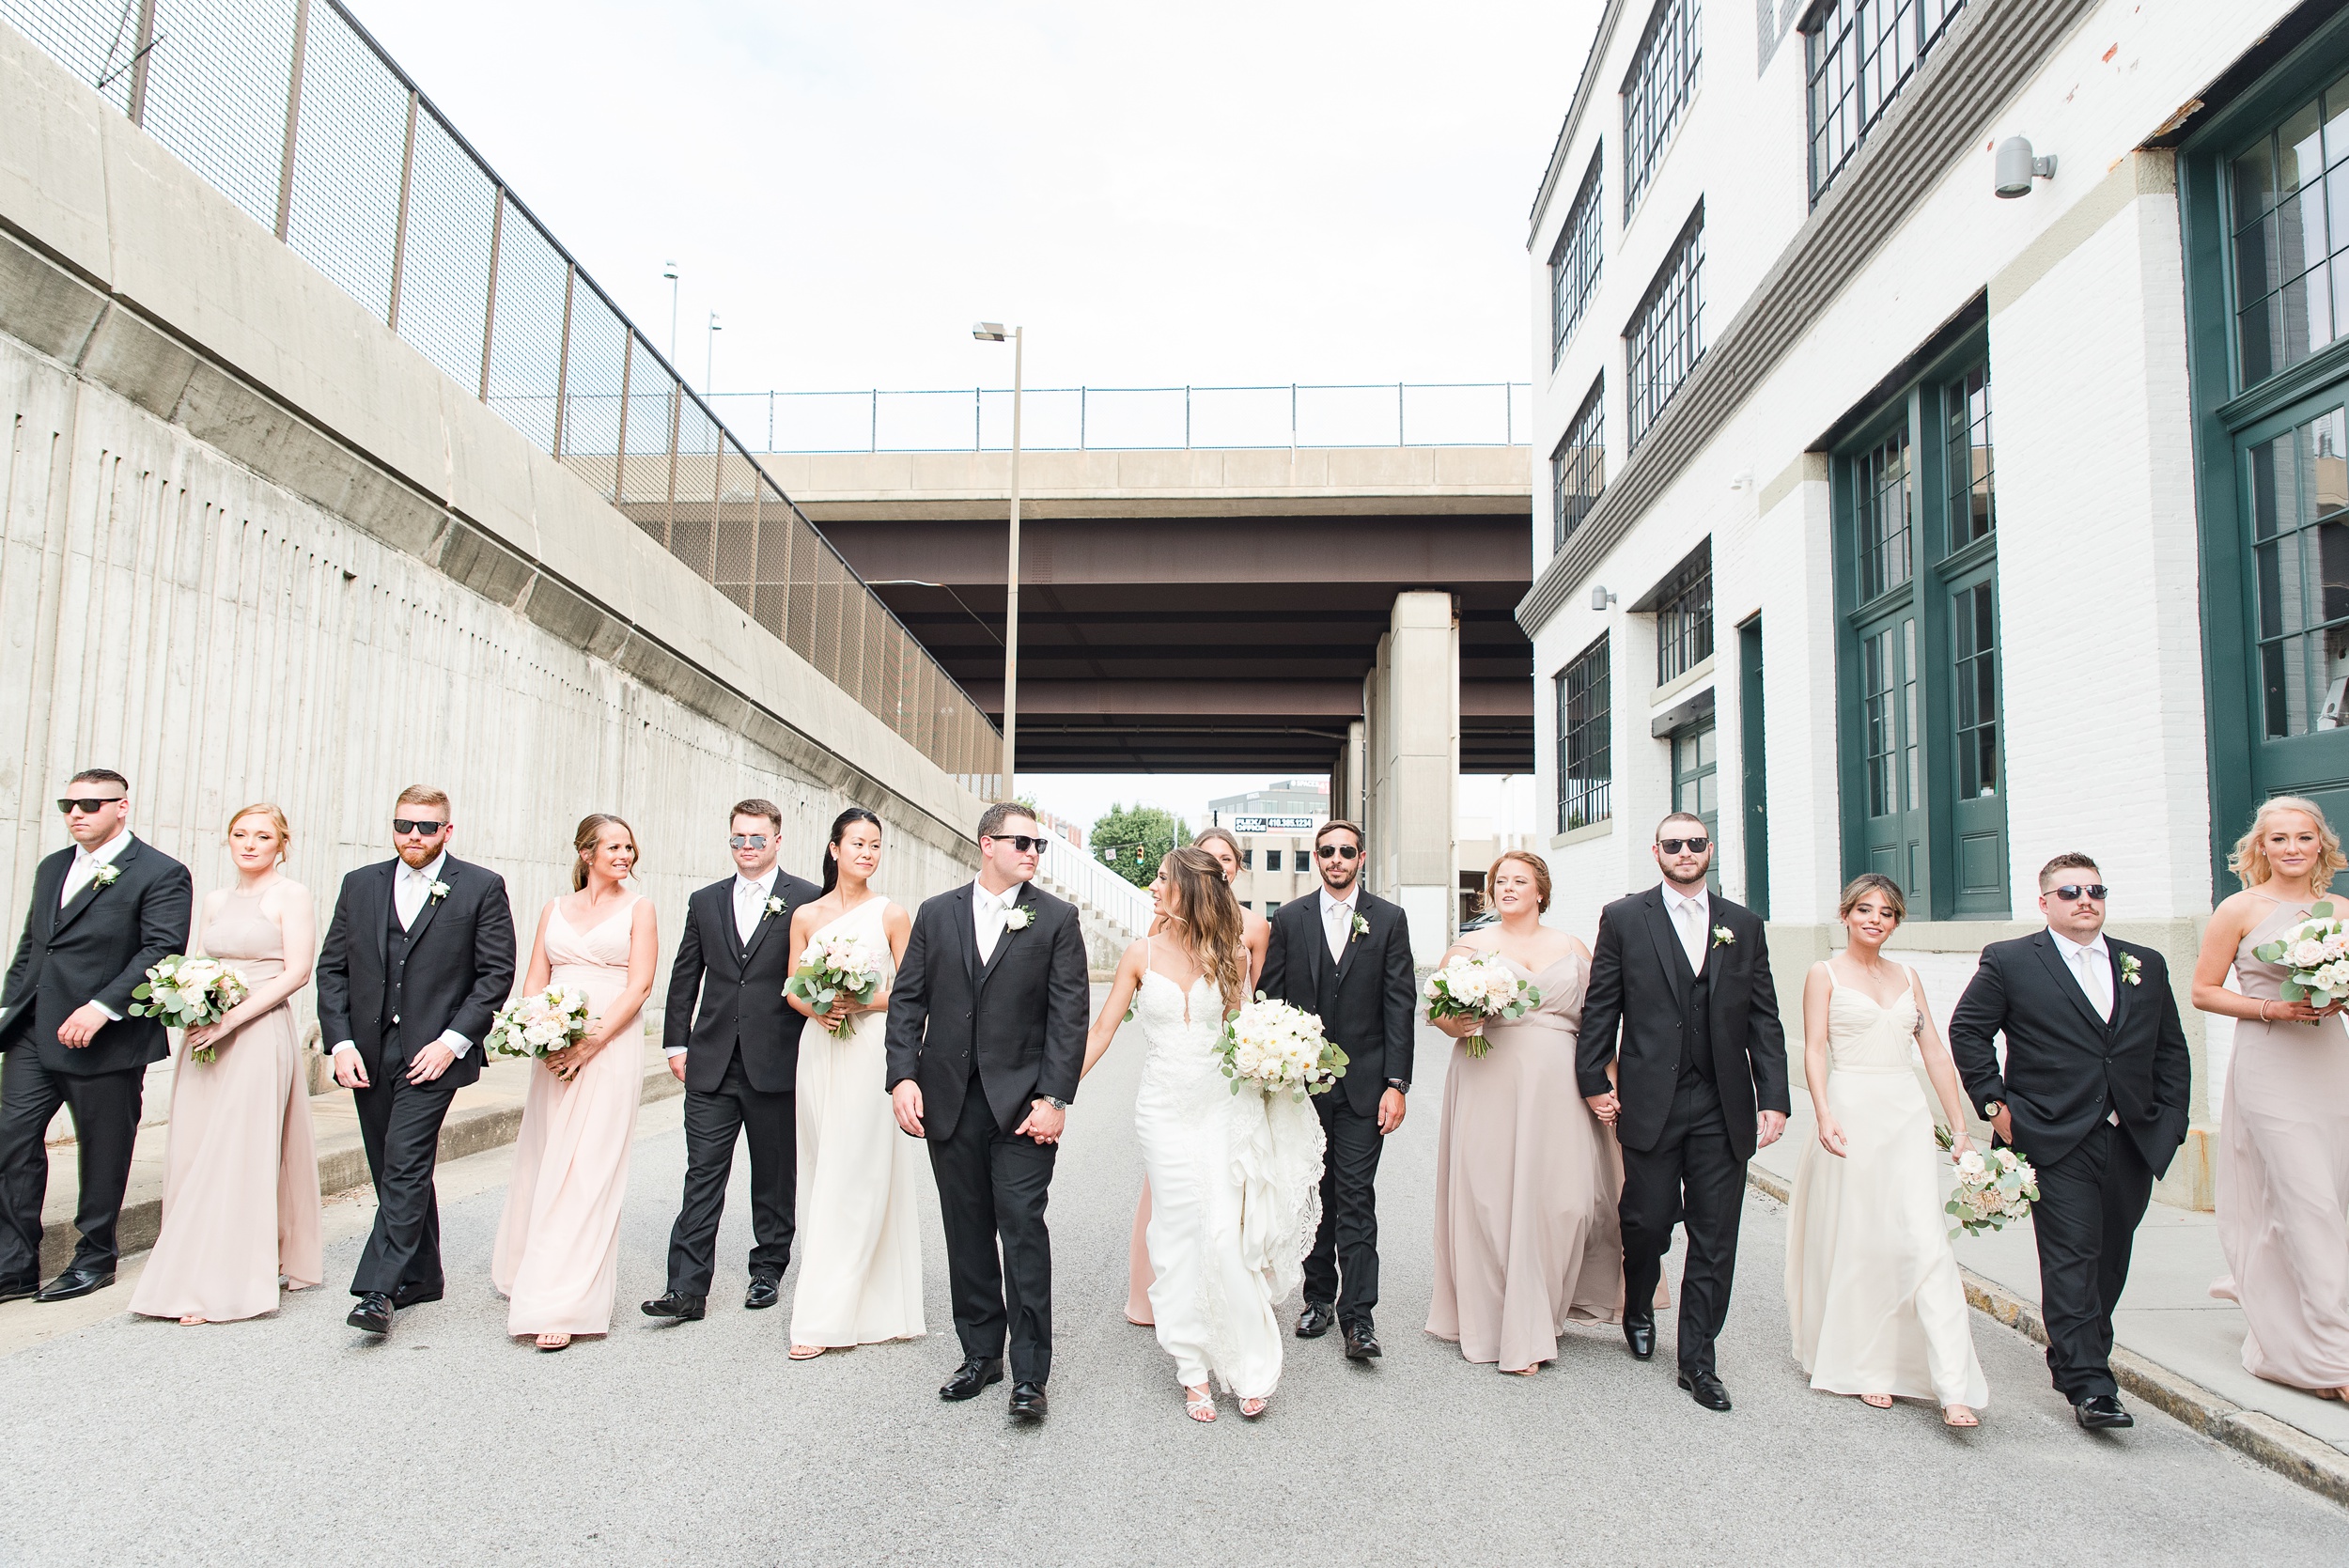 A bride and groom hold hands while walking through an alley with their wedding party at The Winslow Baltimore